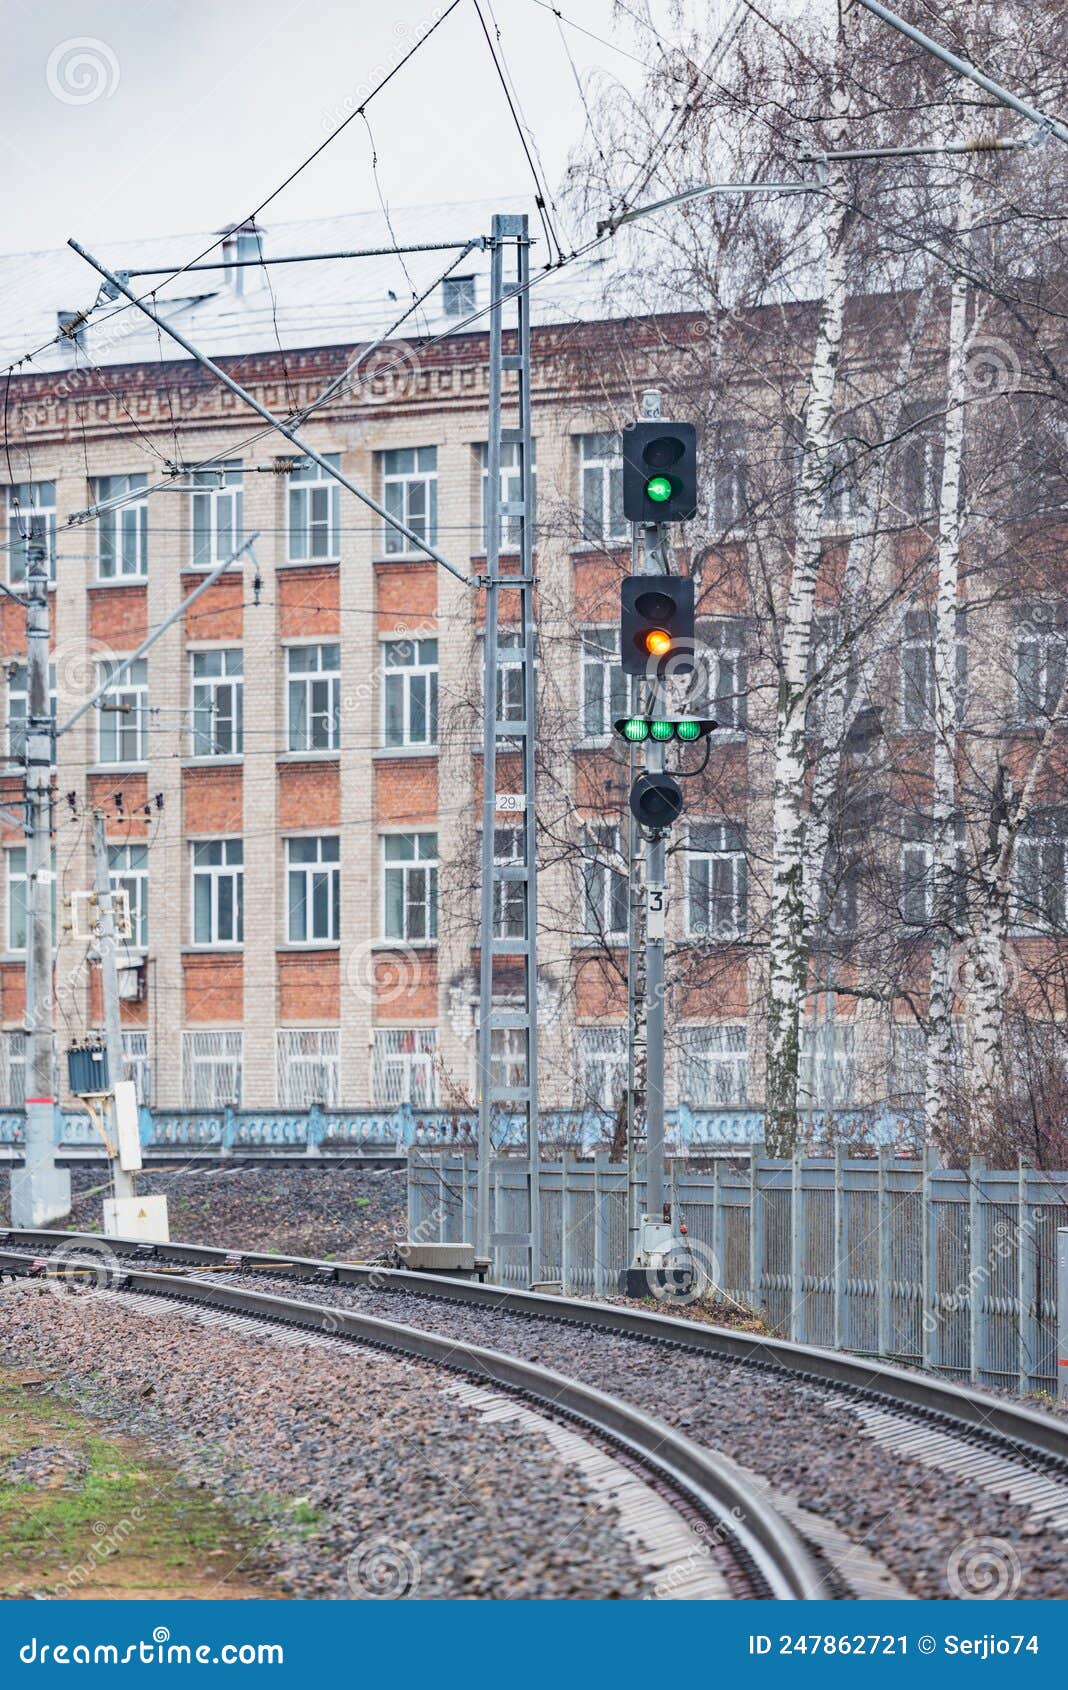 trafficlight by the railway track.